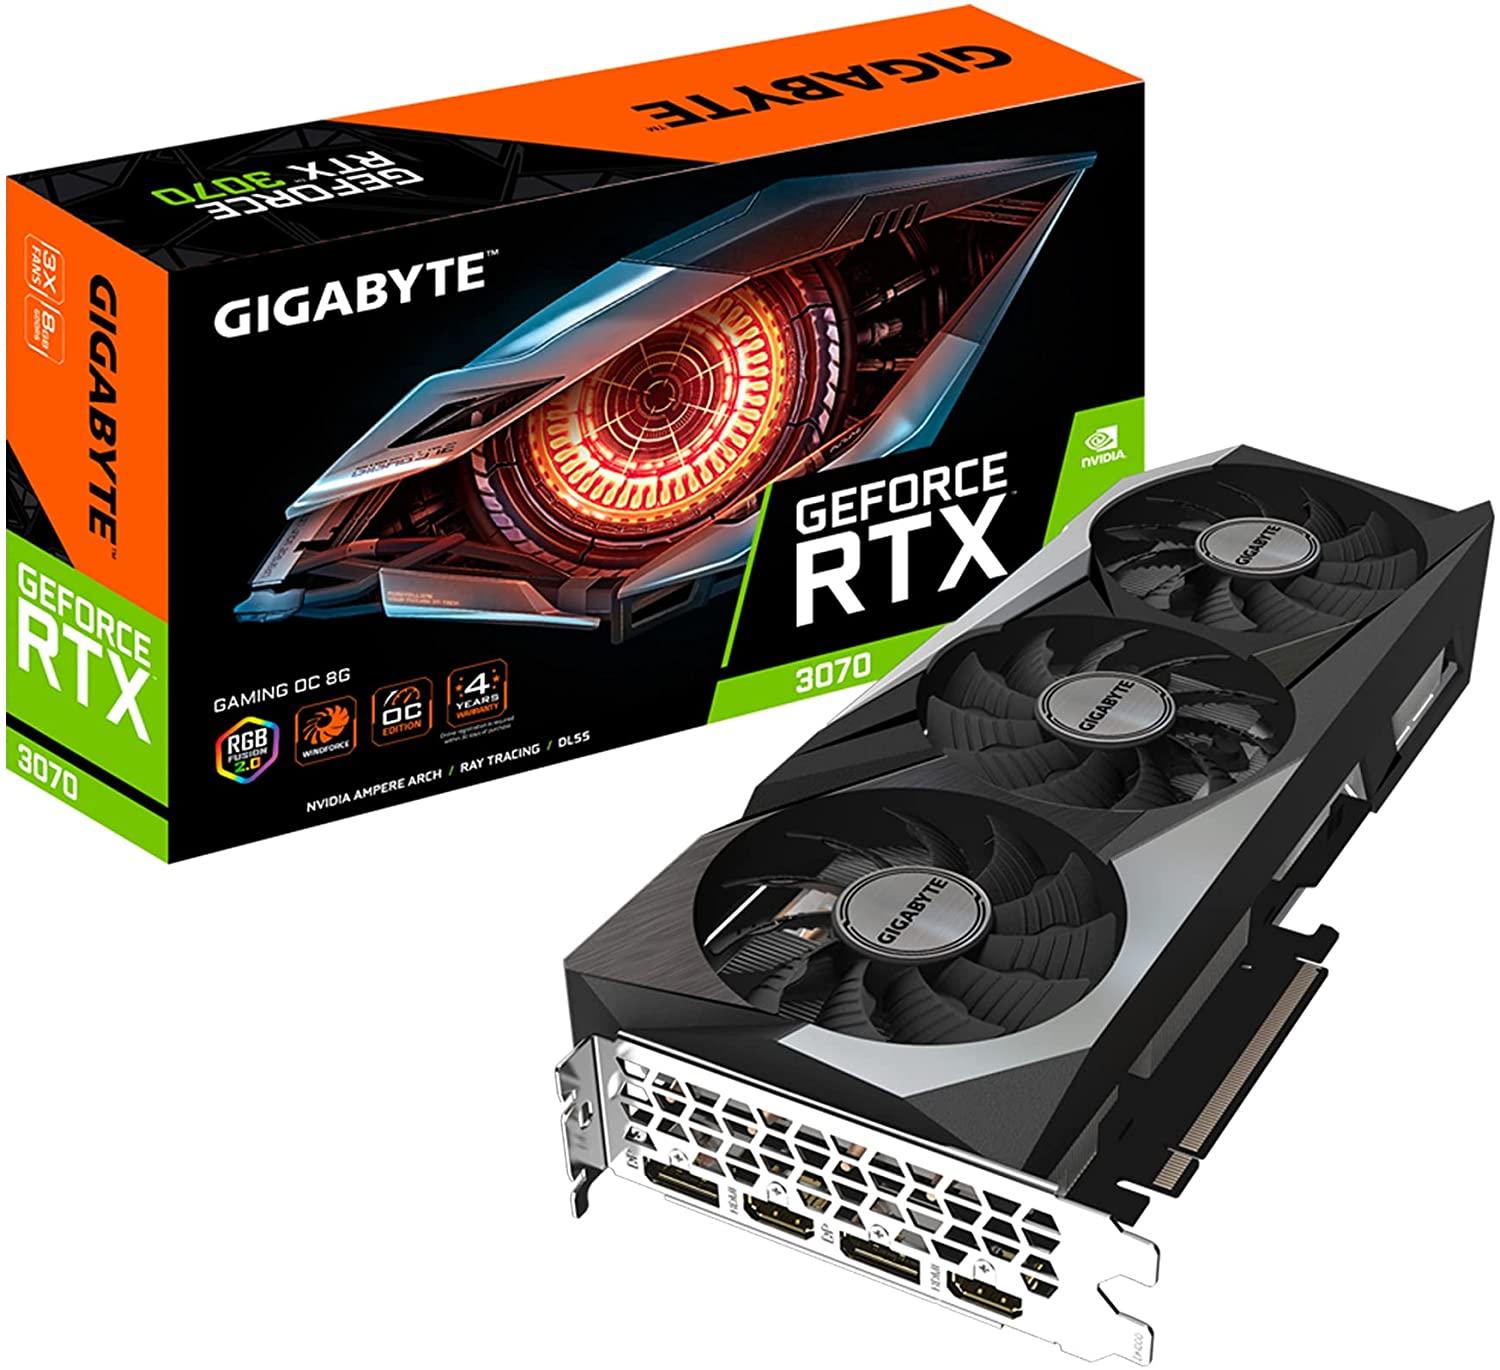 Gigabyte GeForce RTX 3070 Gaming OC 8G Graphics Card for $599.99 Shipped